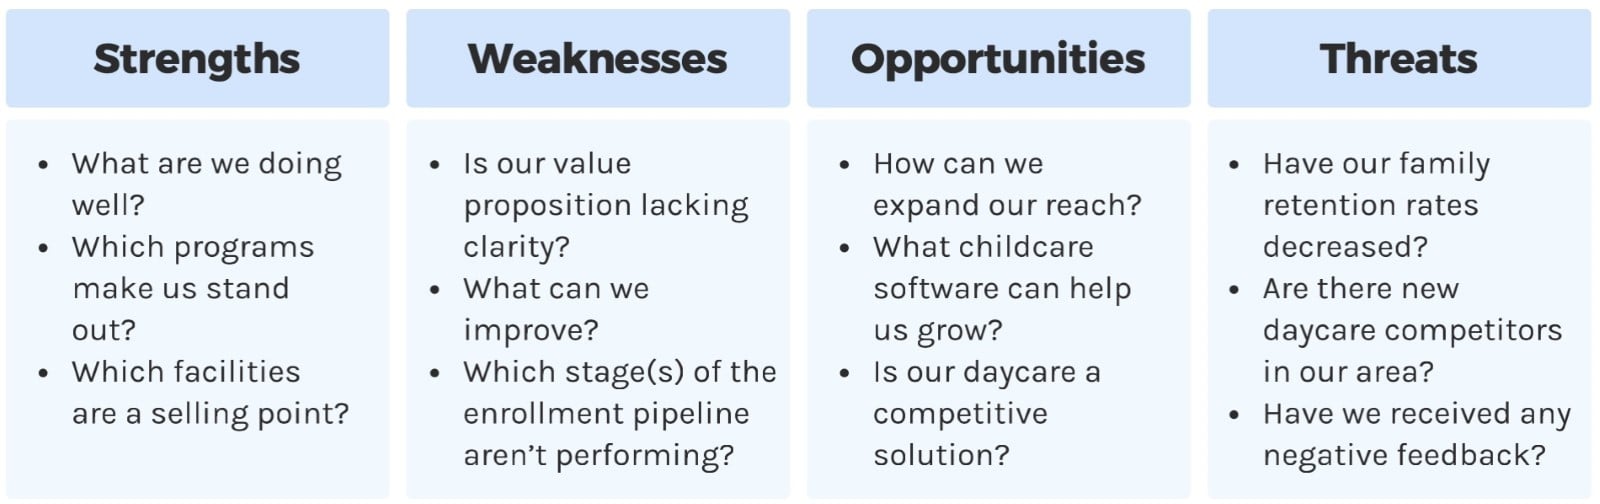 daycare business plan - SWOT